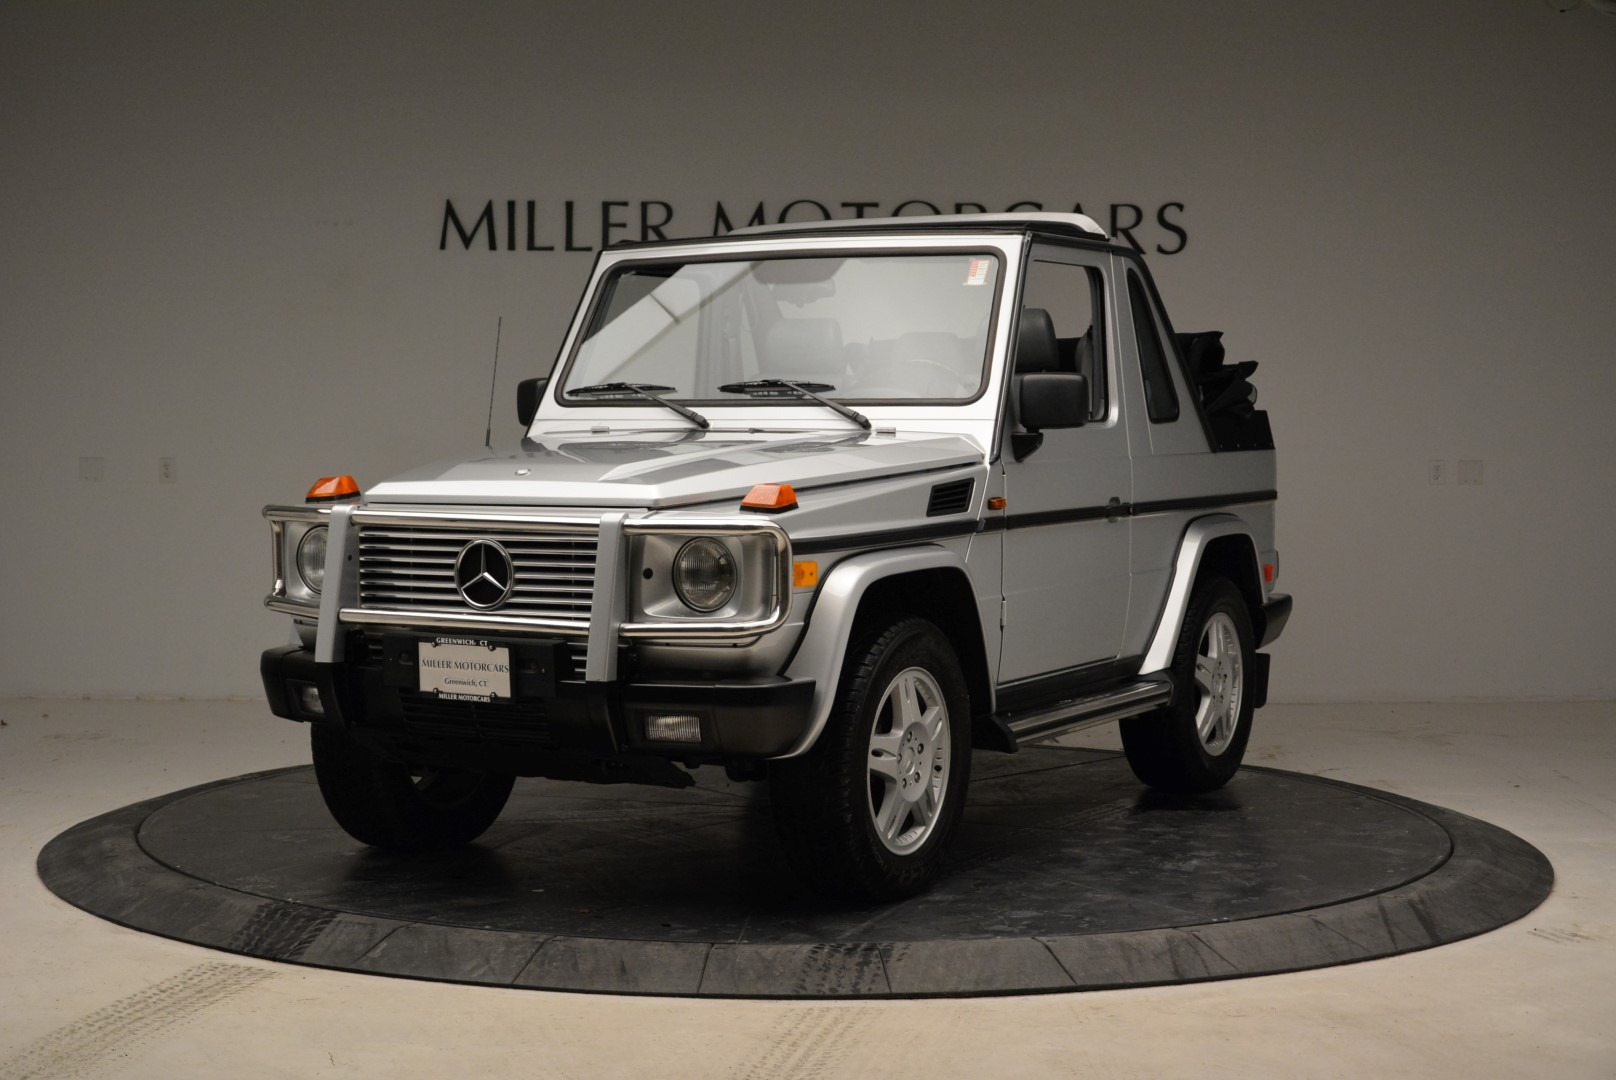 Used 1999 Mercedes Benz G500 Cabriolet for sale Sold at Aston Martin of Greenwich in Greenwich CT 06830 1